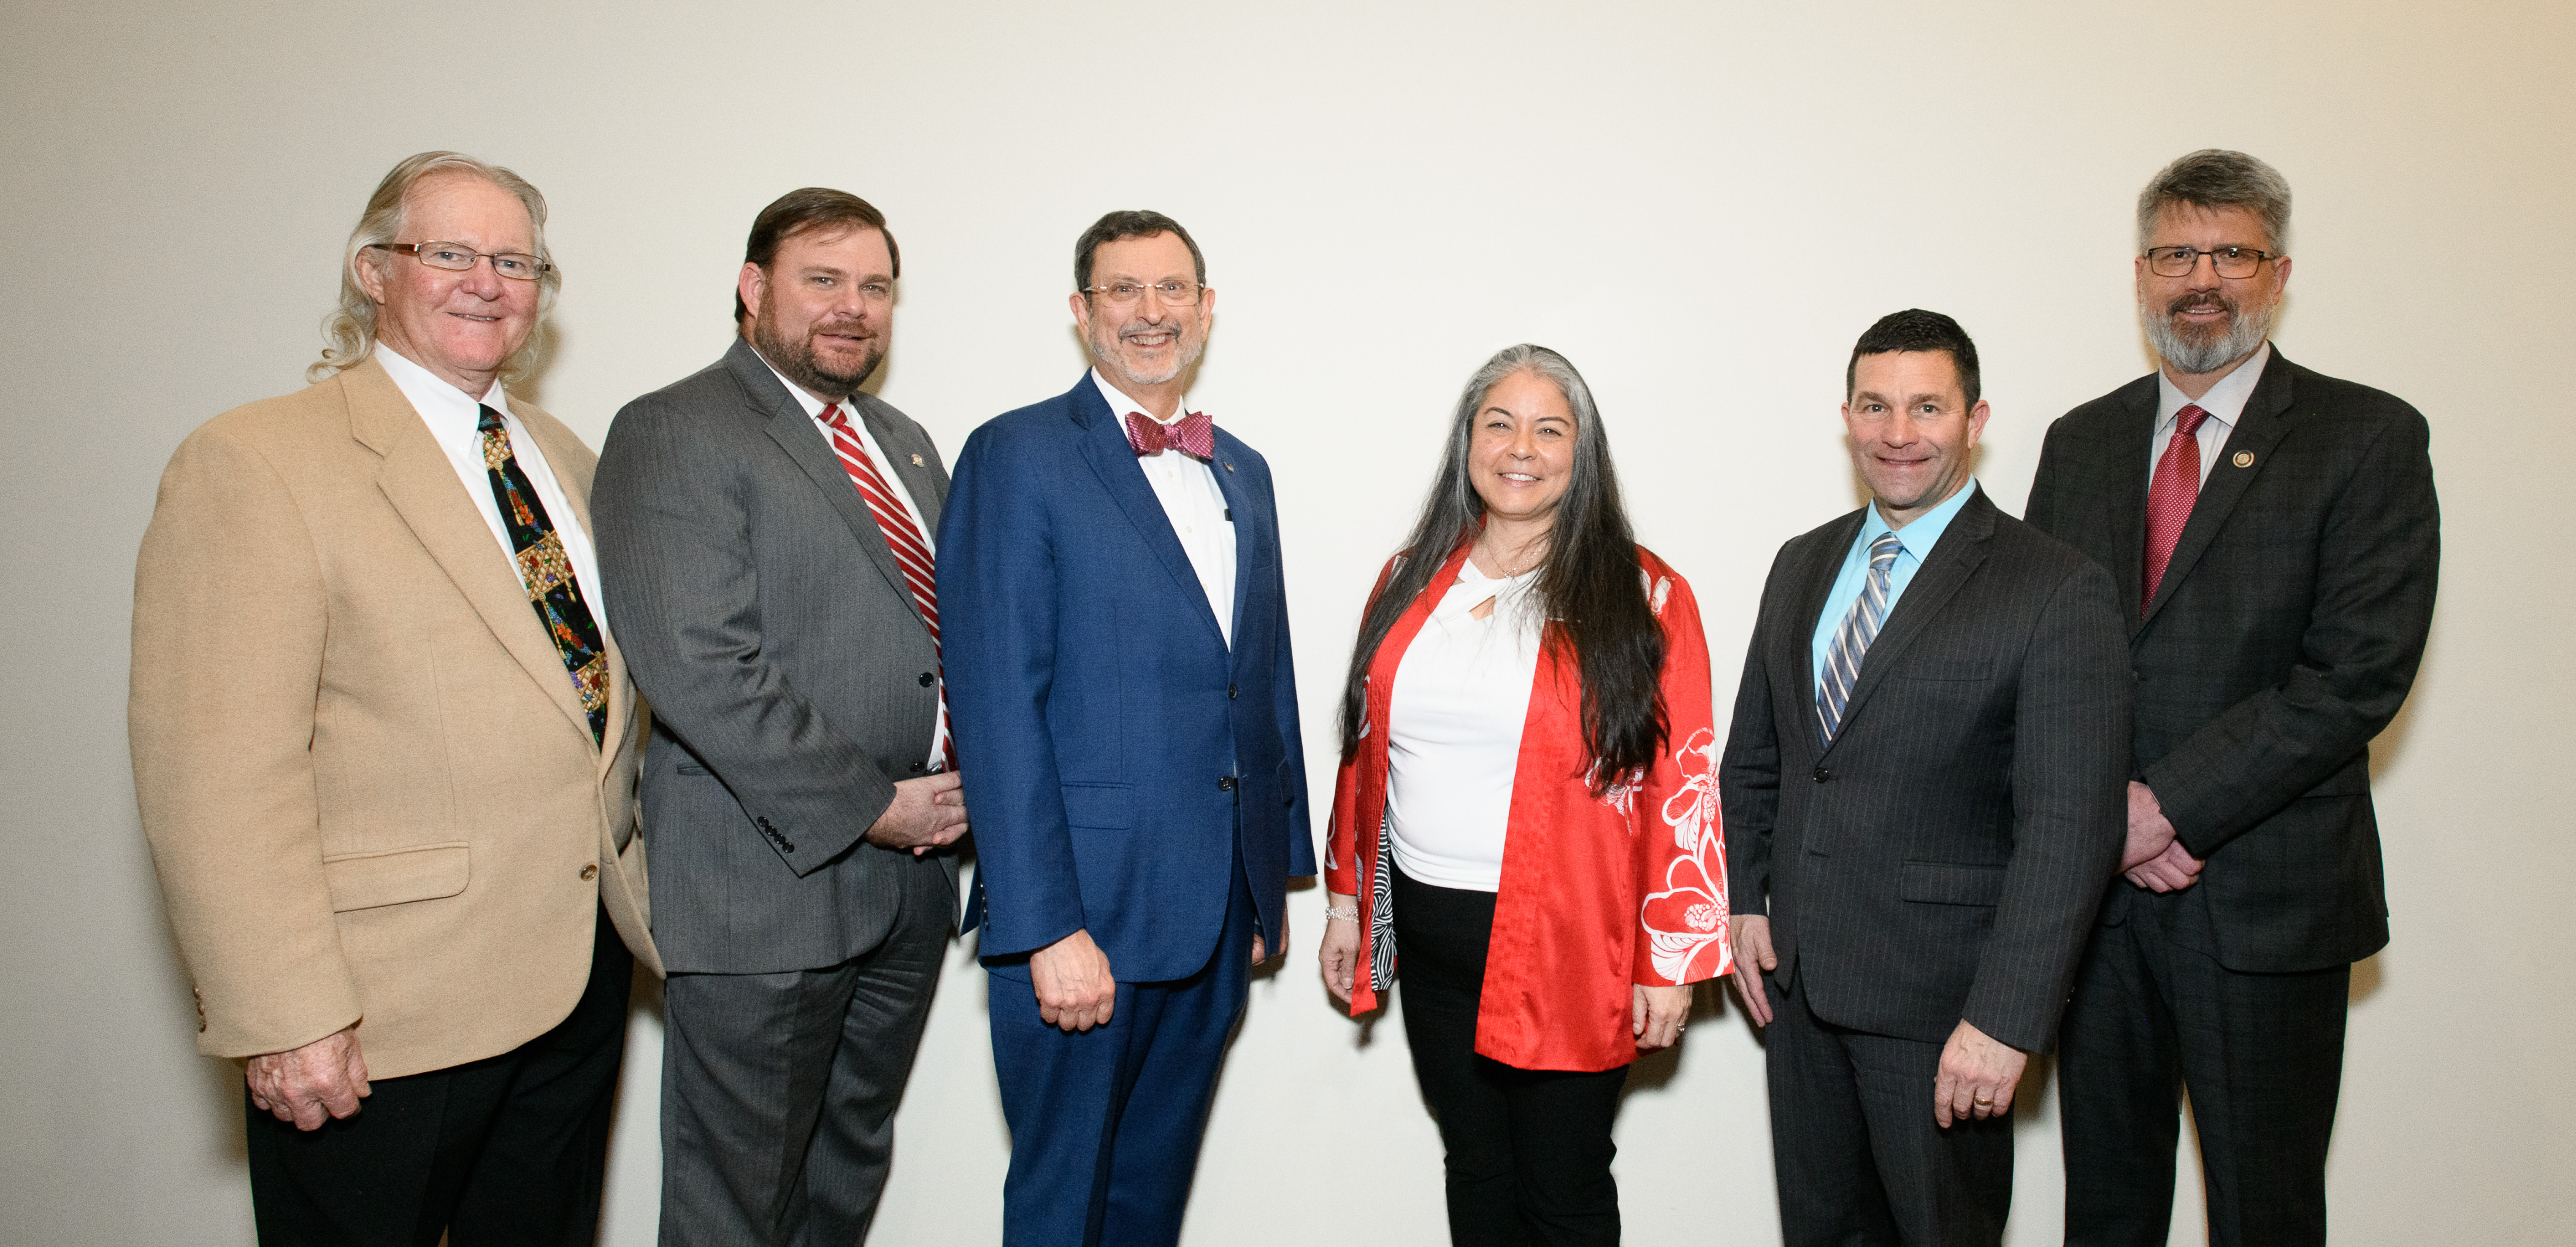 Group photo, from left: IUP Council of Trustees Chairman Sam Smith; Senator Joe Pittman, IUP President Dr. Michael Driscoll, Founding Dean, IUP proposed college of osteopathic medicine Dr. Miko Rose; Rep. Jim Struzzi; Rep. Brian Smith